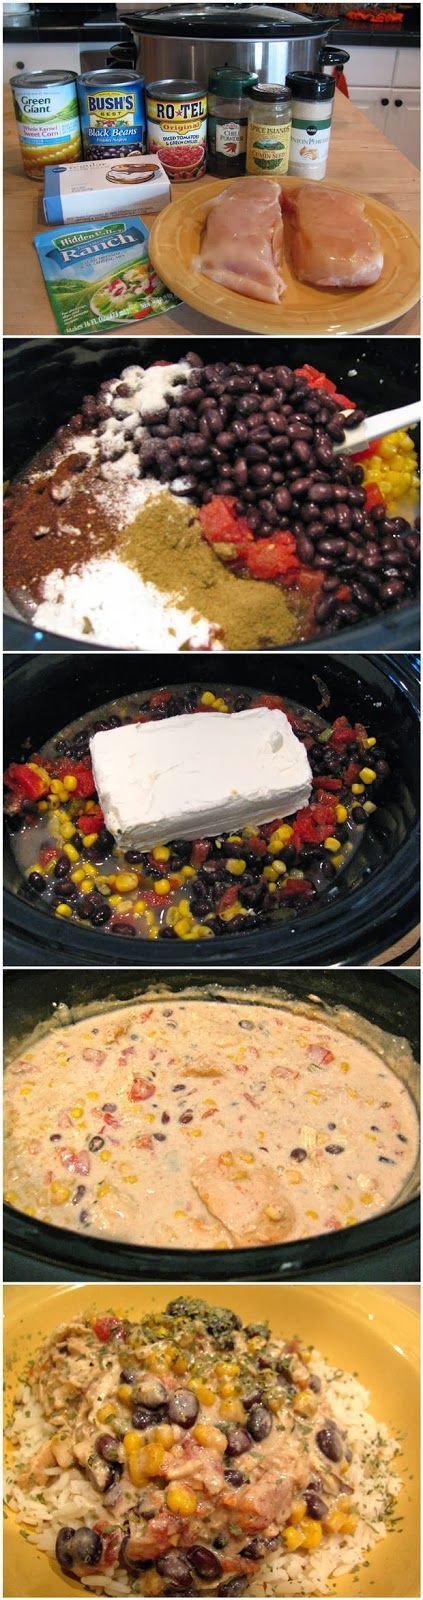 Crock Pot Cream Cheese Chicken Chile; Im made this today 1/27/14.  It was delicious!  Add less than 1 tsp of cumin if you dont